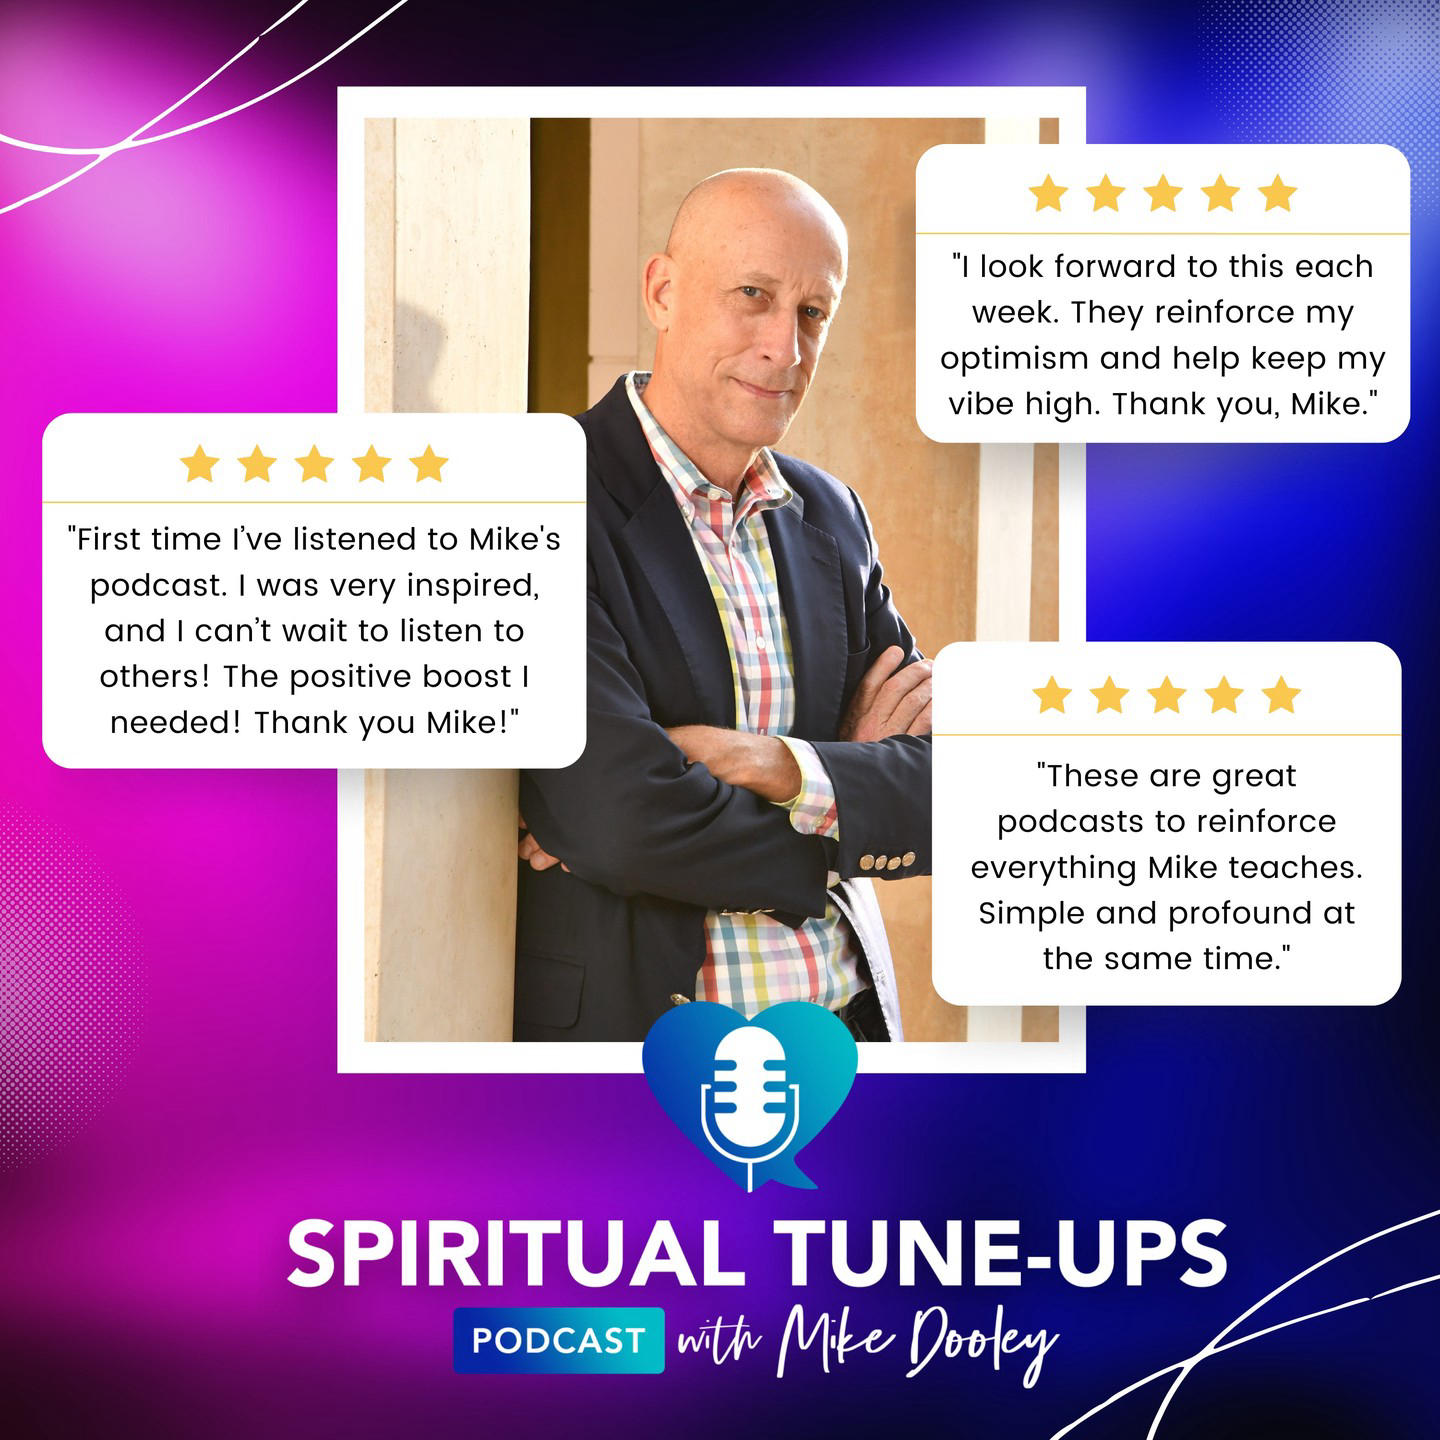 image  1 Mike Dooley - Top 10 Spiritual Podcasts in Canada and Portugal